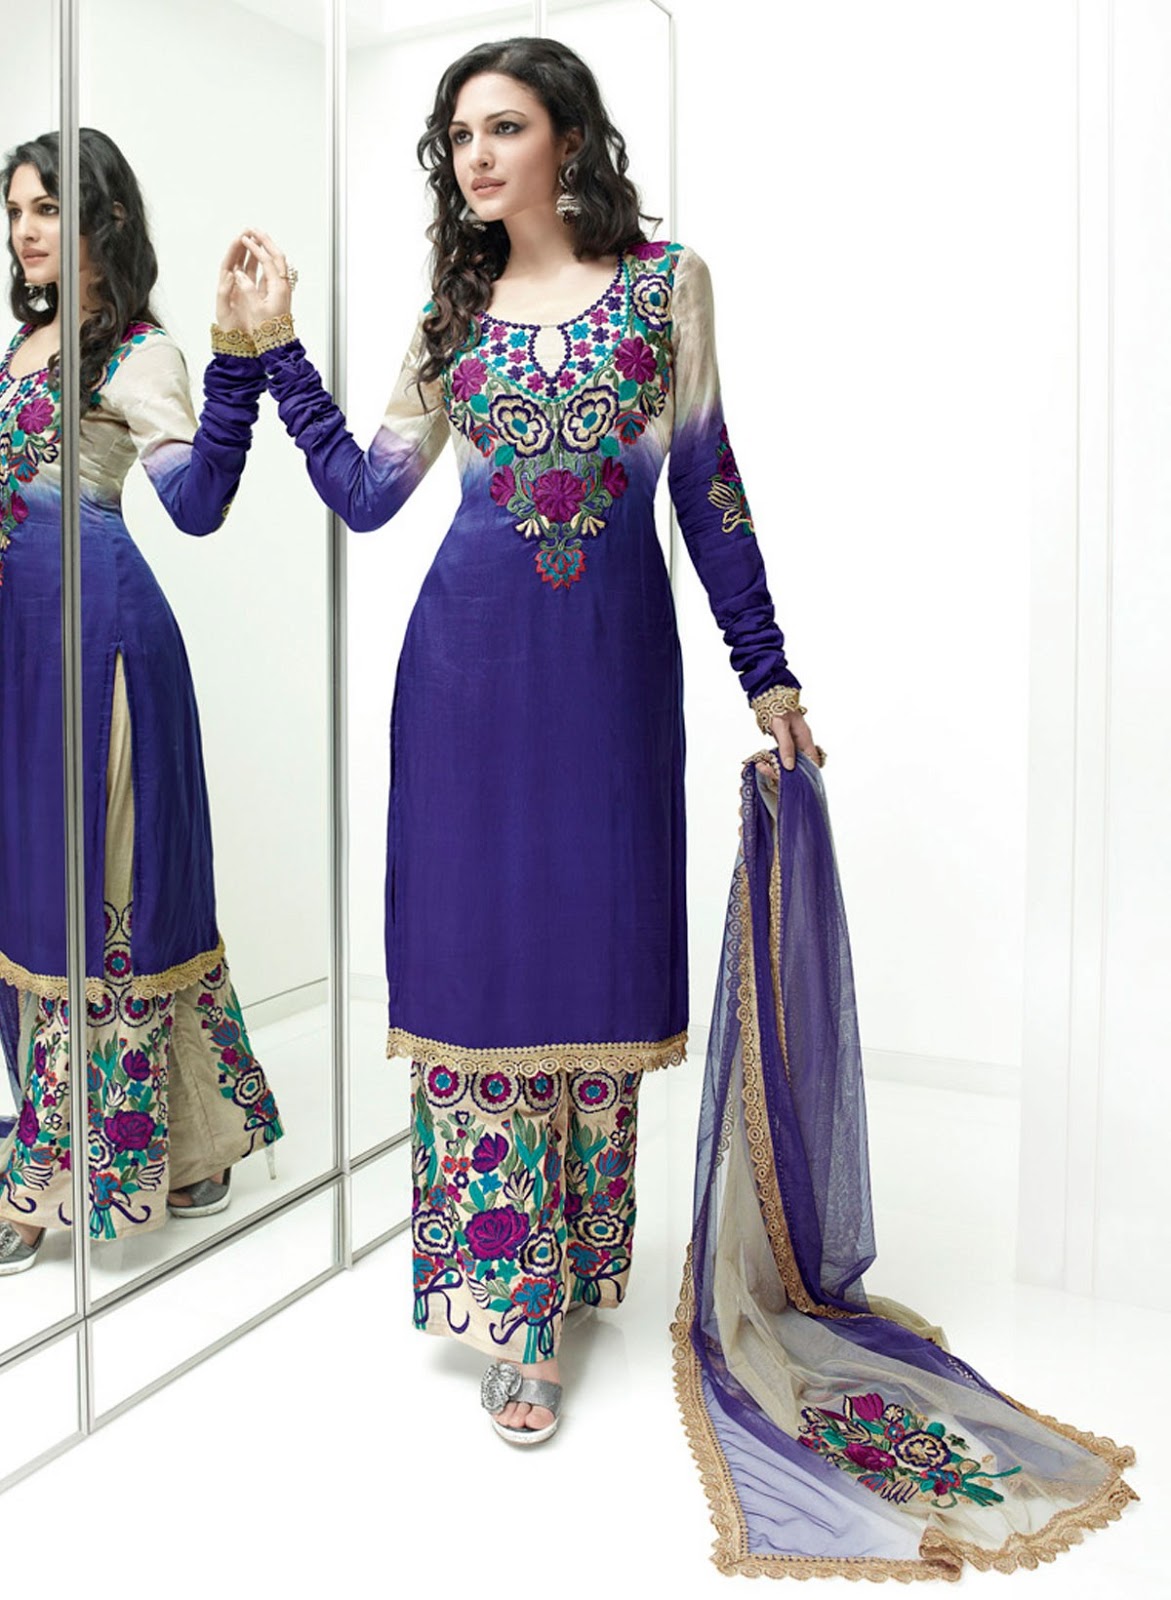 Blue Faux Crepe Salwar Kameez With Heavy Resham Floral Embroidery ~ Ladies Fashion Style